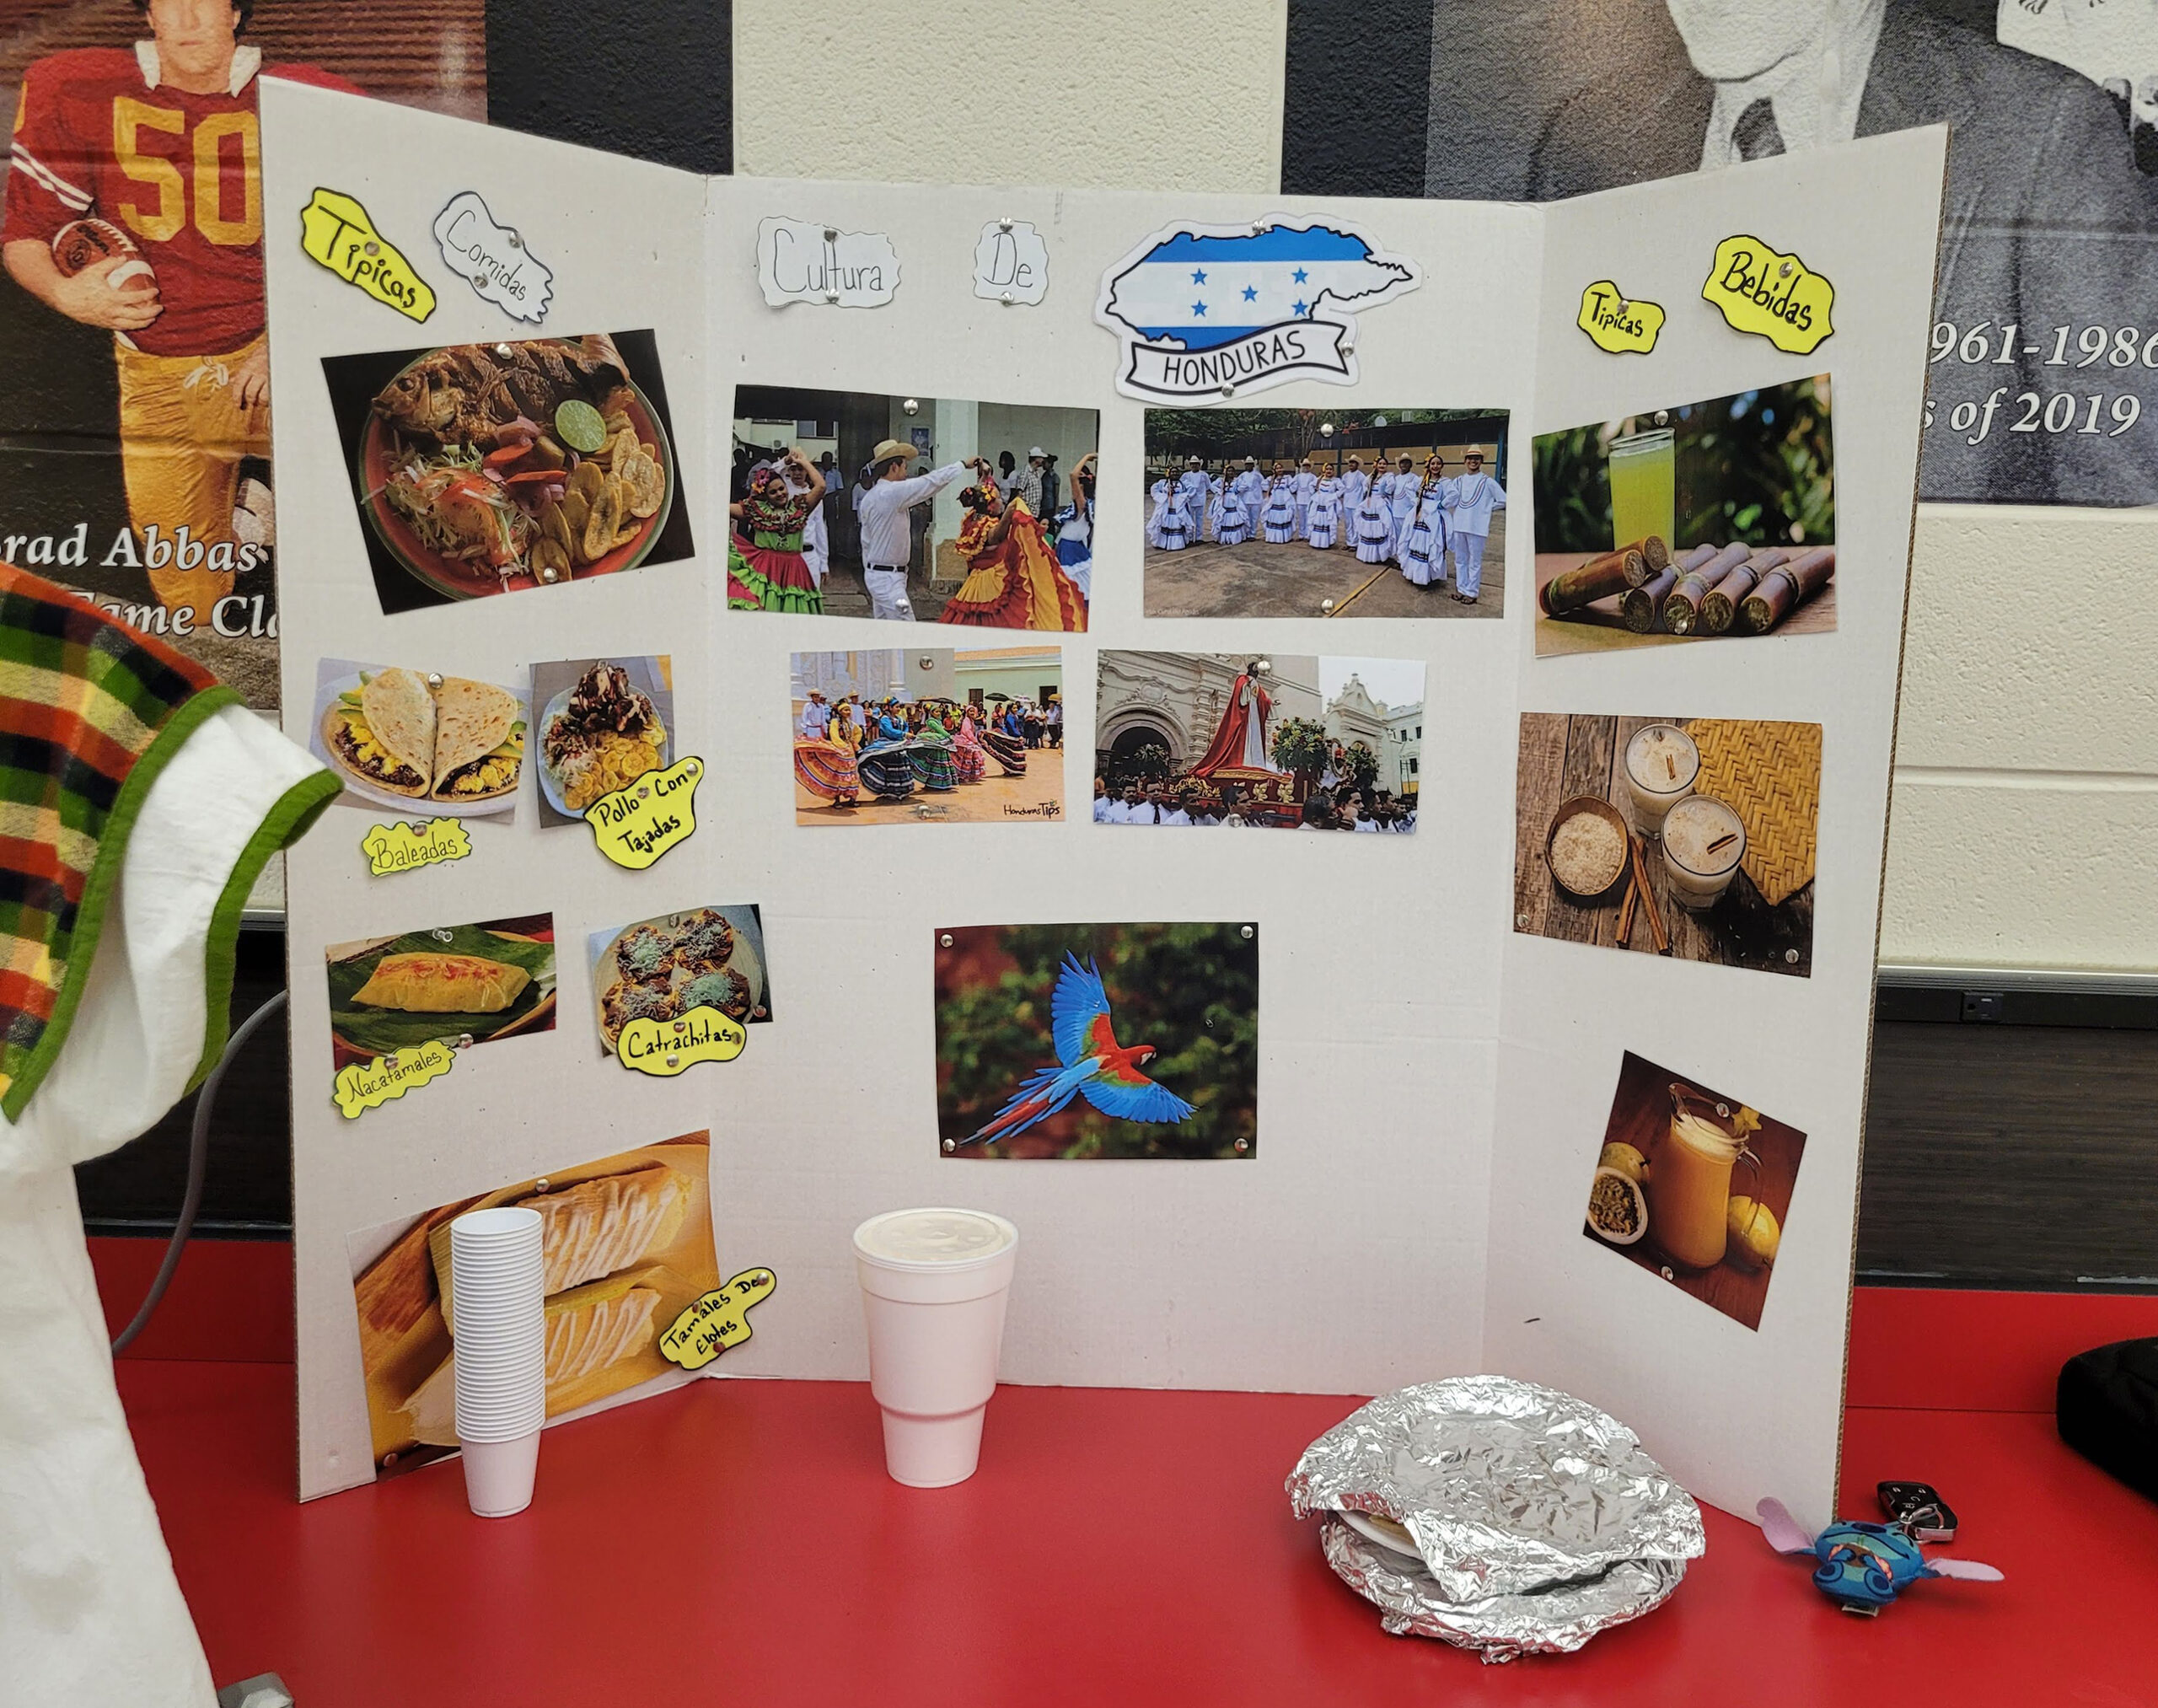 A poster board showing cultural aspects of Honduras